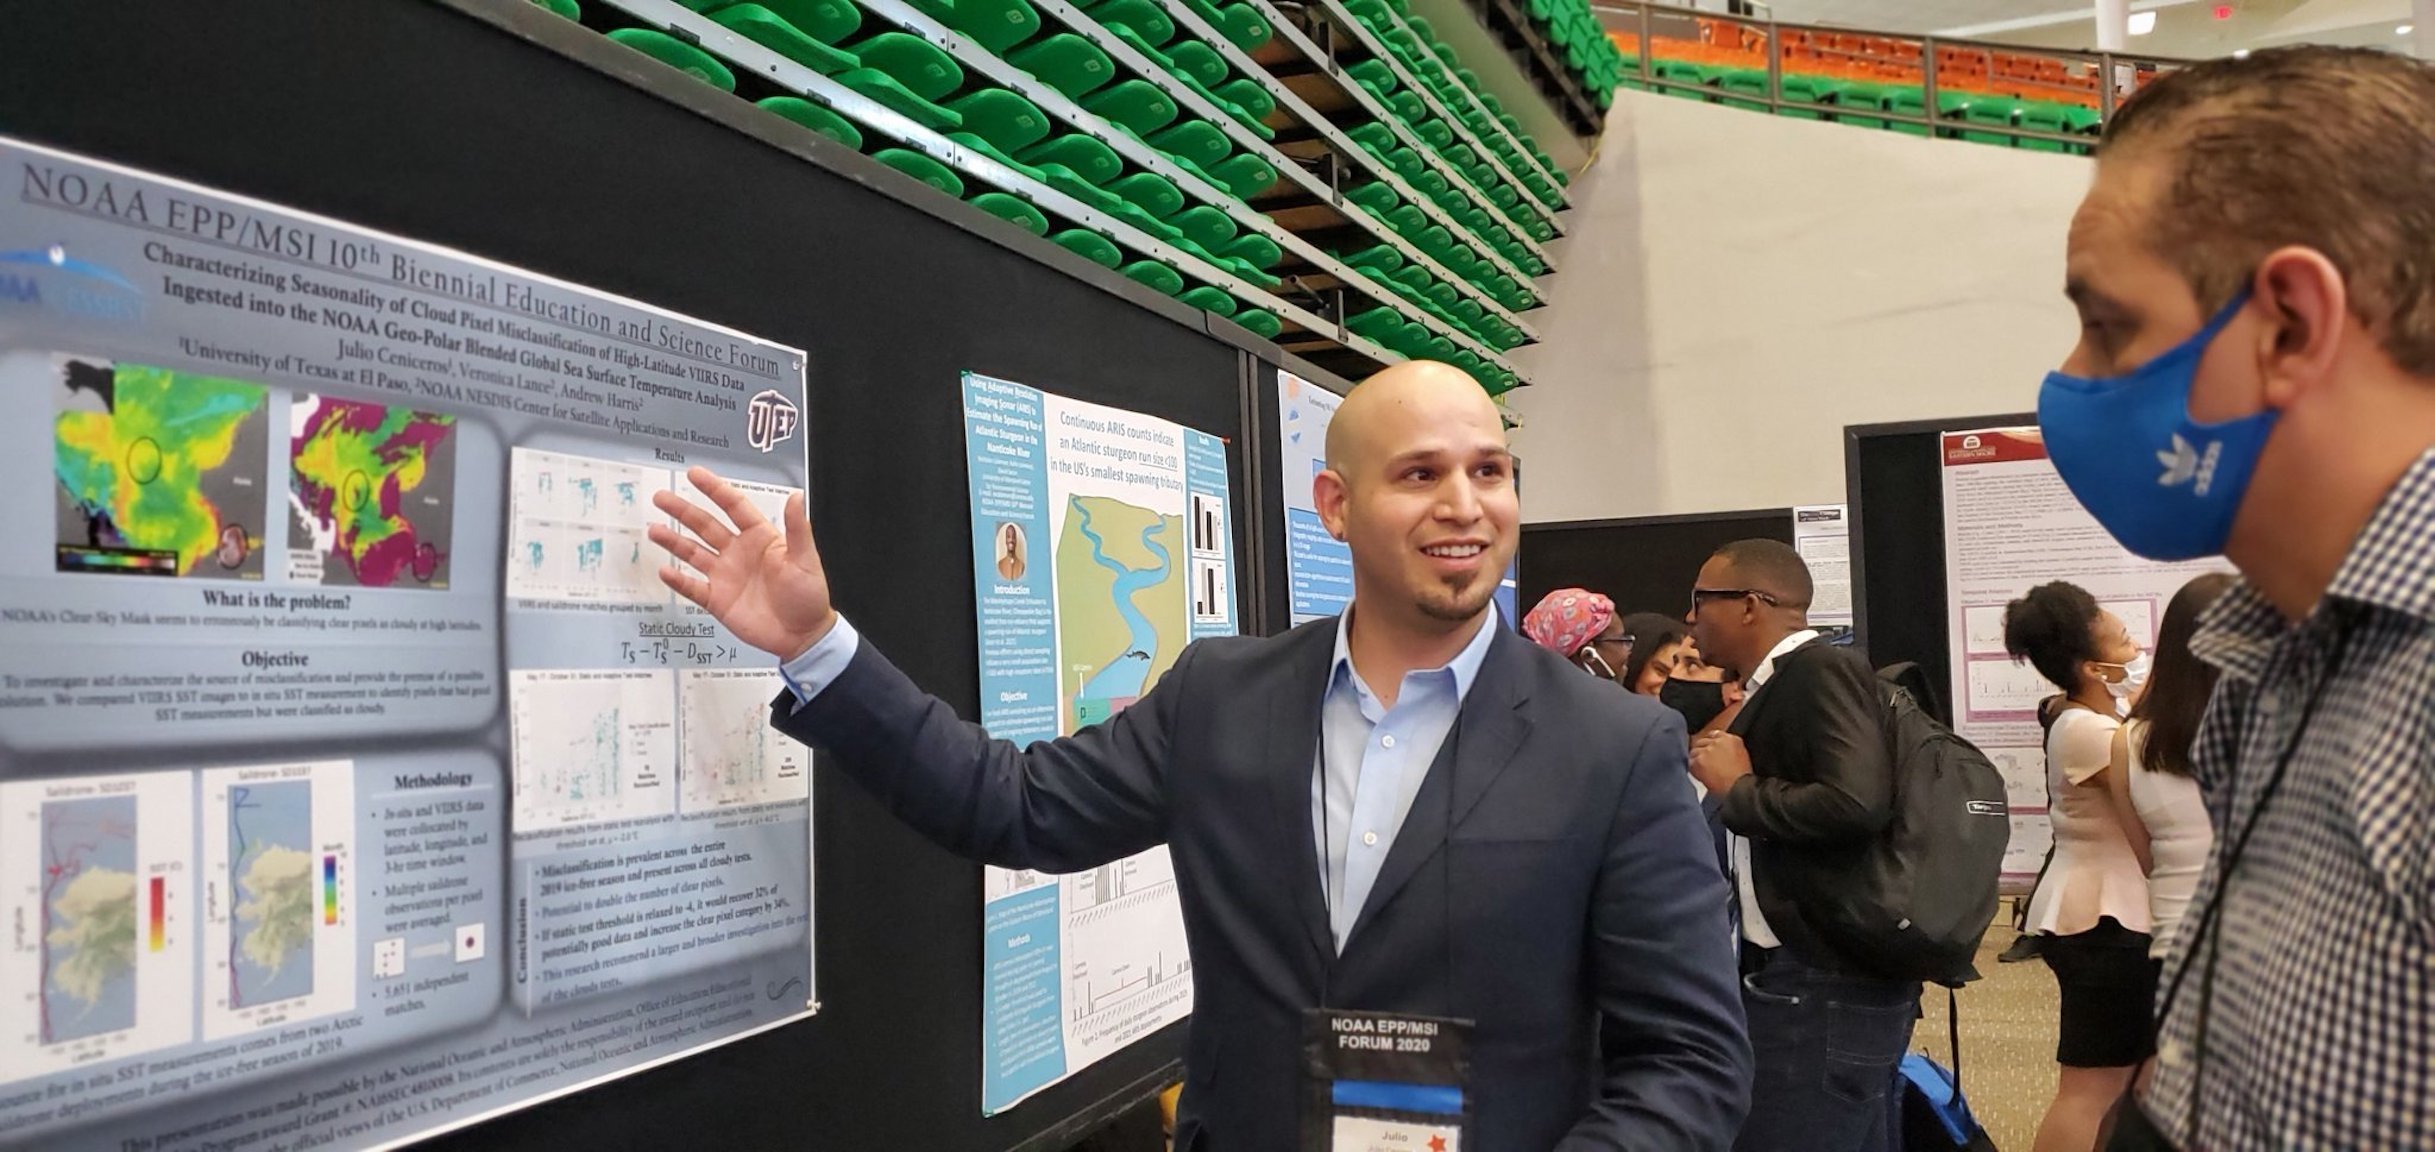 Photo of CESSRST scholar Julio Ceniceros presented his research at the EPP/MSI 10th Biennial Education & Science Forum in Tallahassee, Florida on April 7, 2022. 